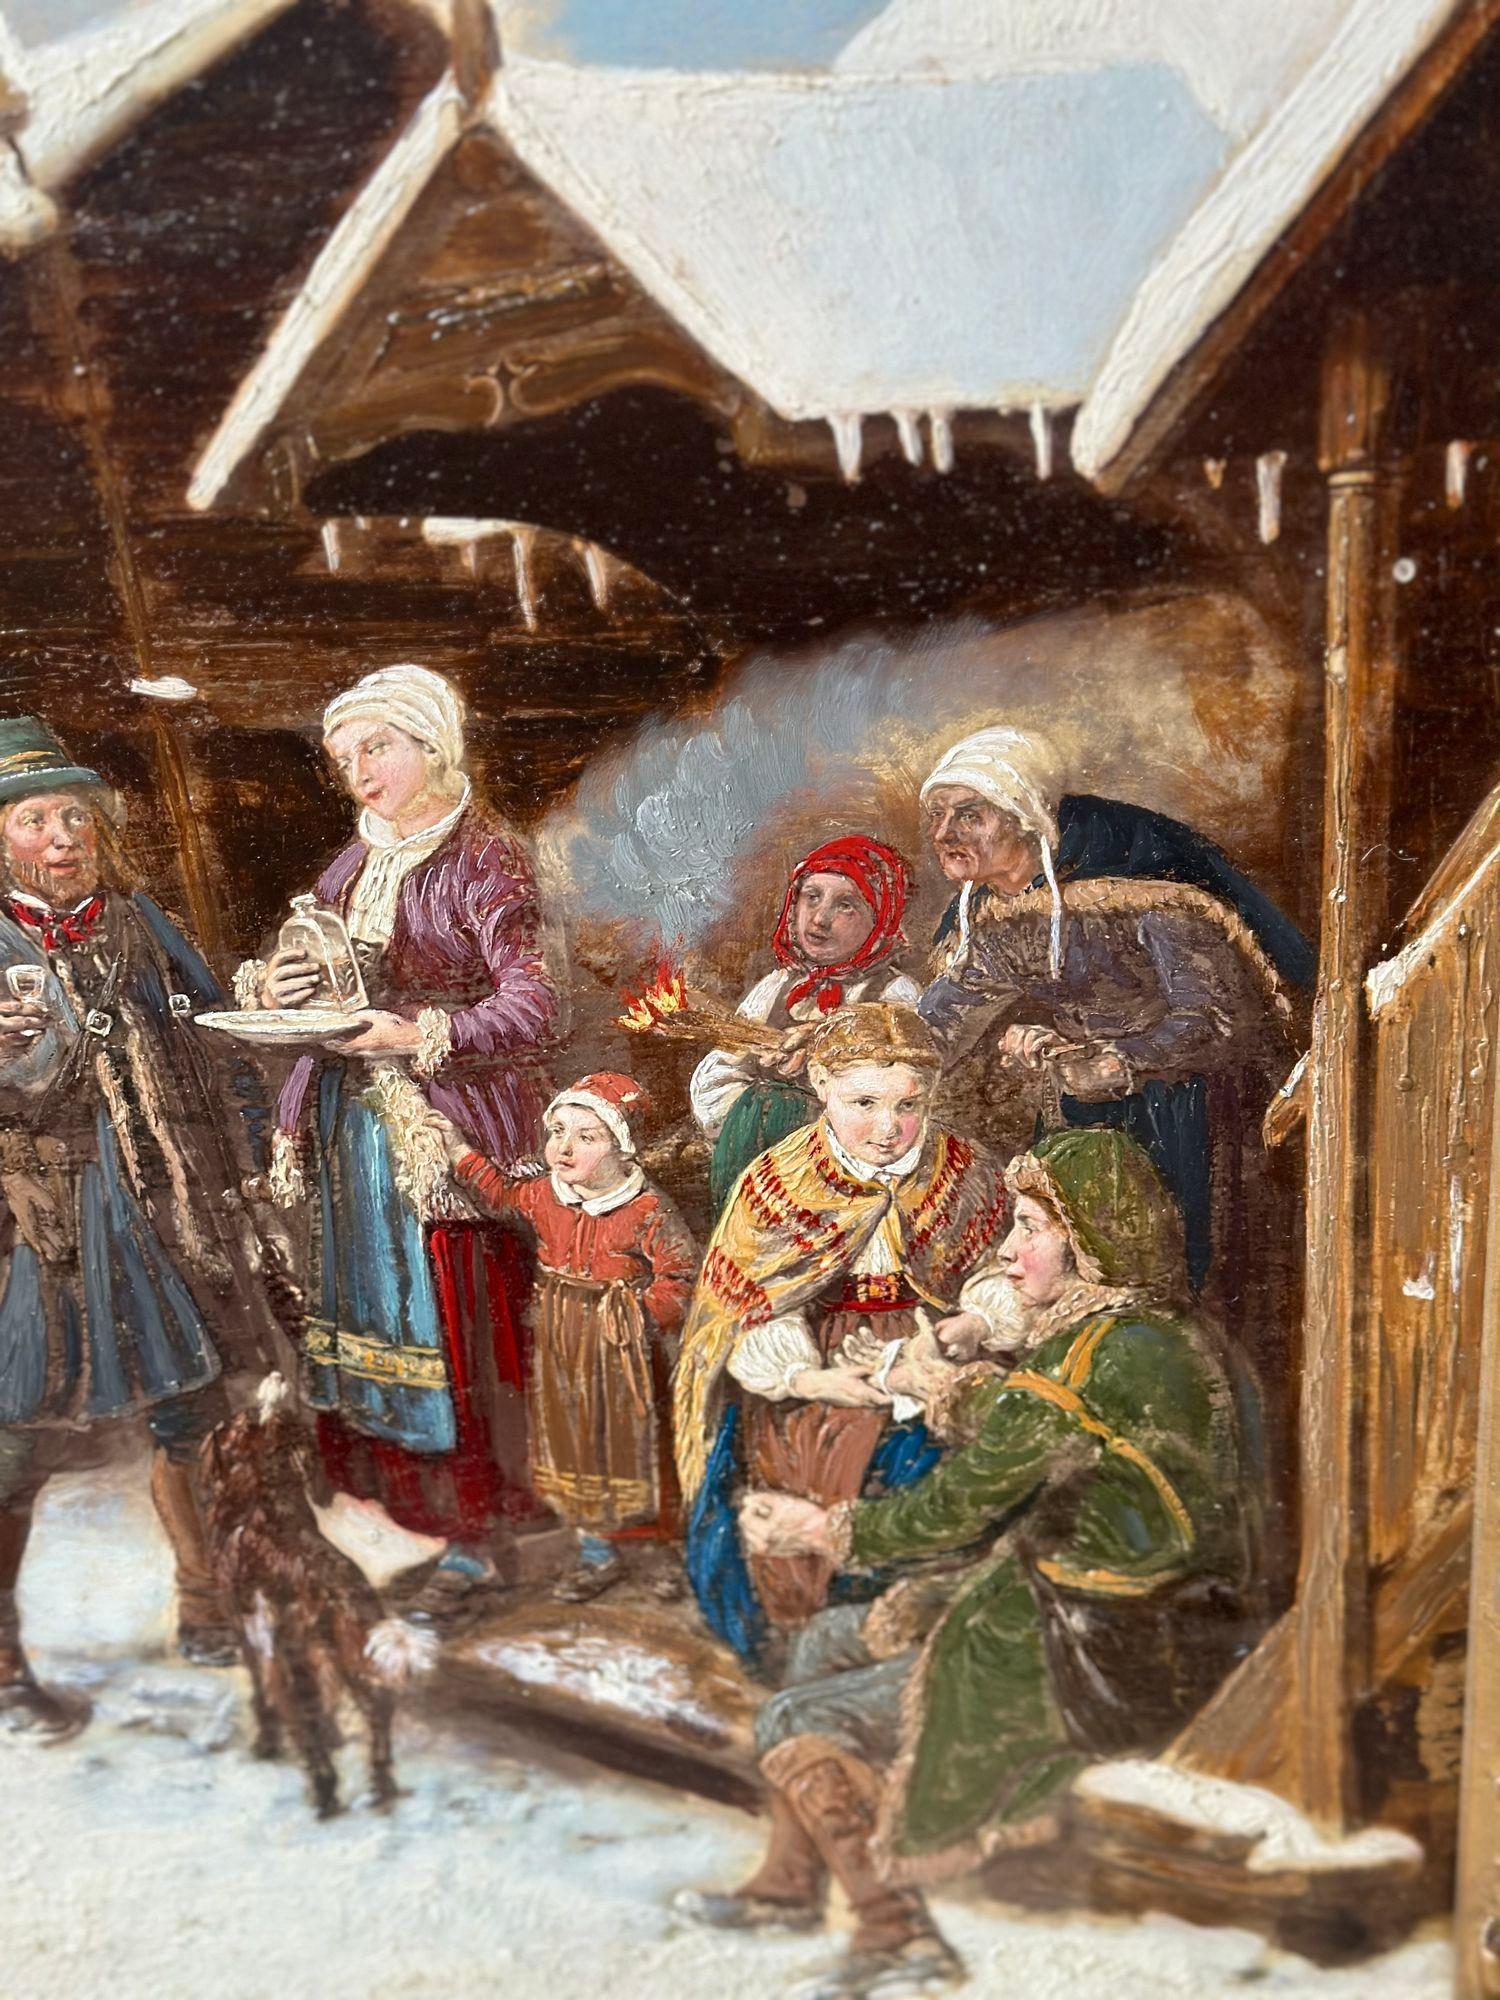 This Russian 19th Century oil on canvas transports us to a quaint snowy village in Russia. The scene unfolds outside a charming cottage, where a family has gathered after a successful reindeer hunt. The canvas captures the essence of familial warmth